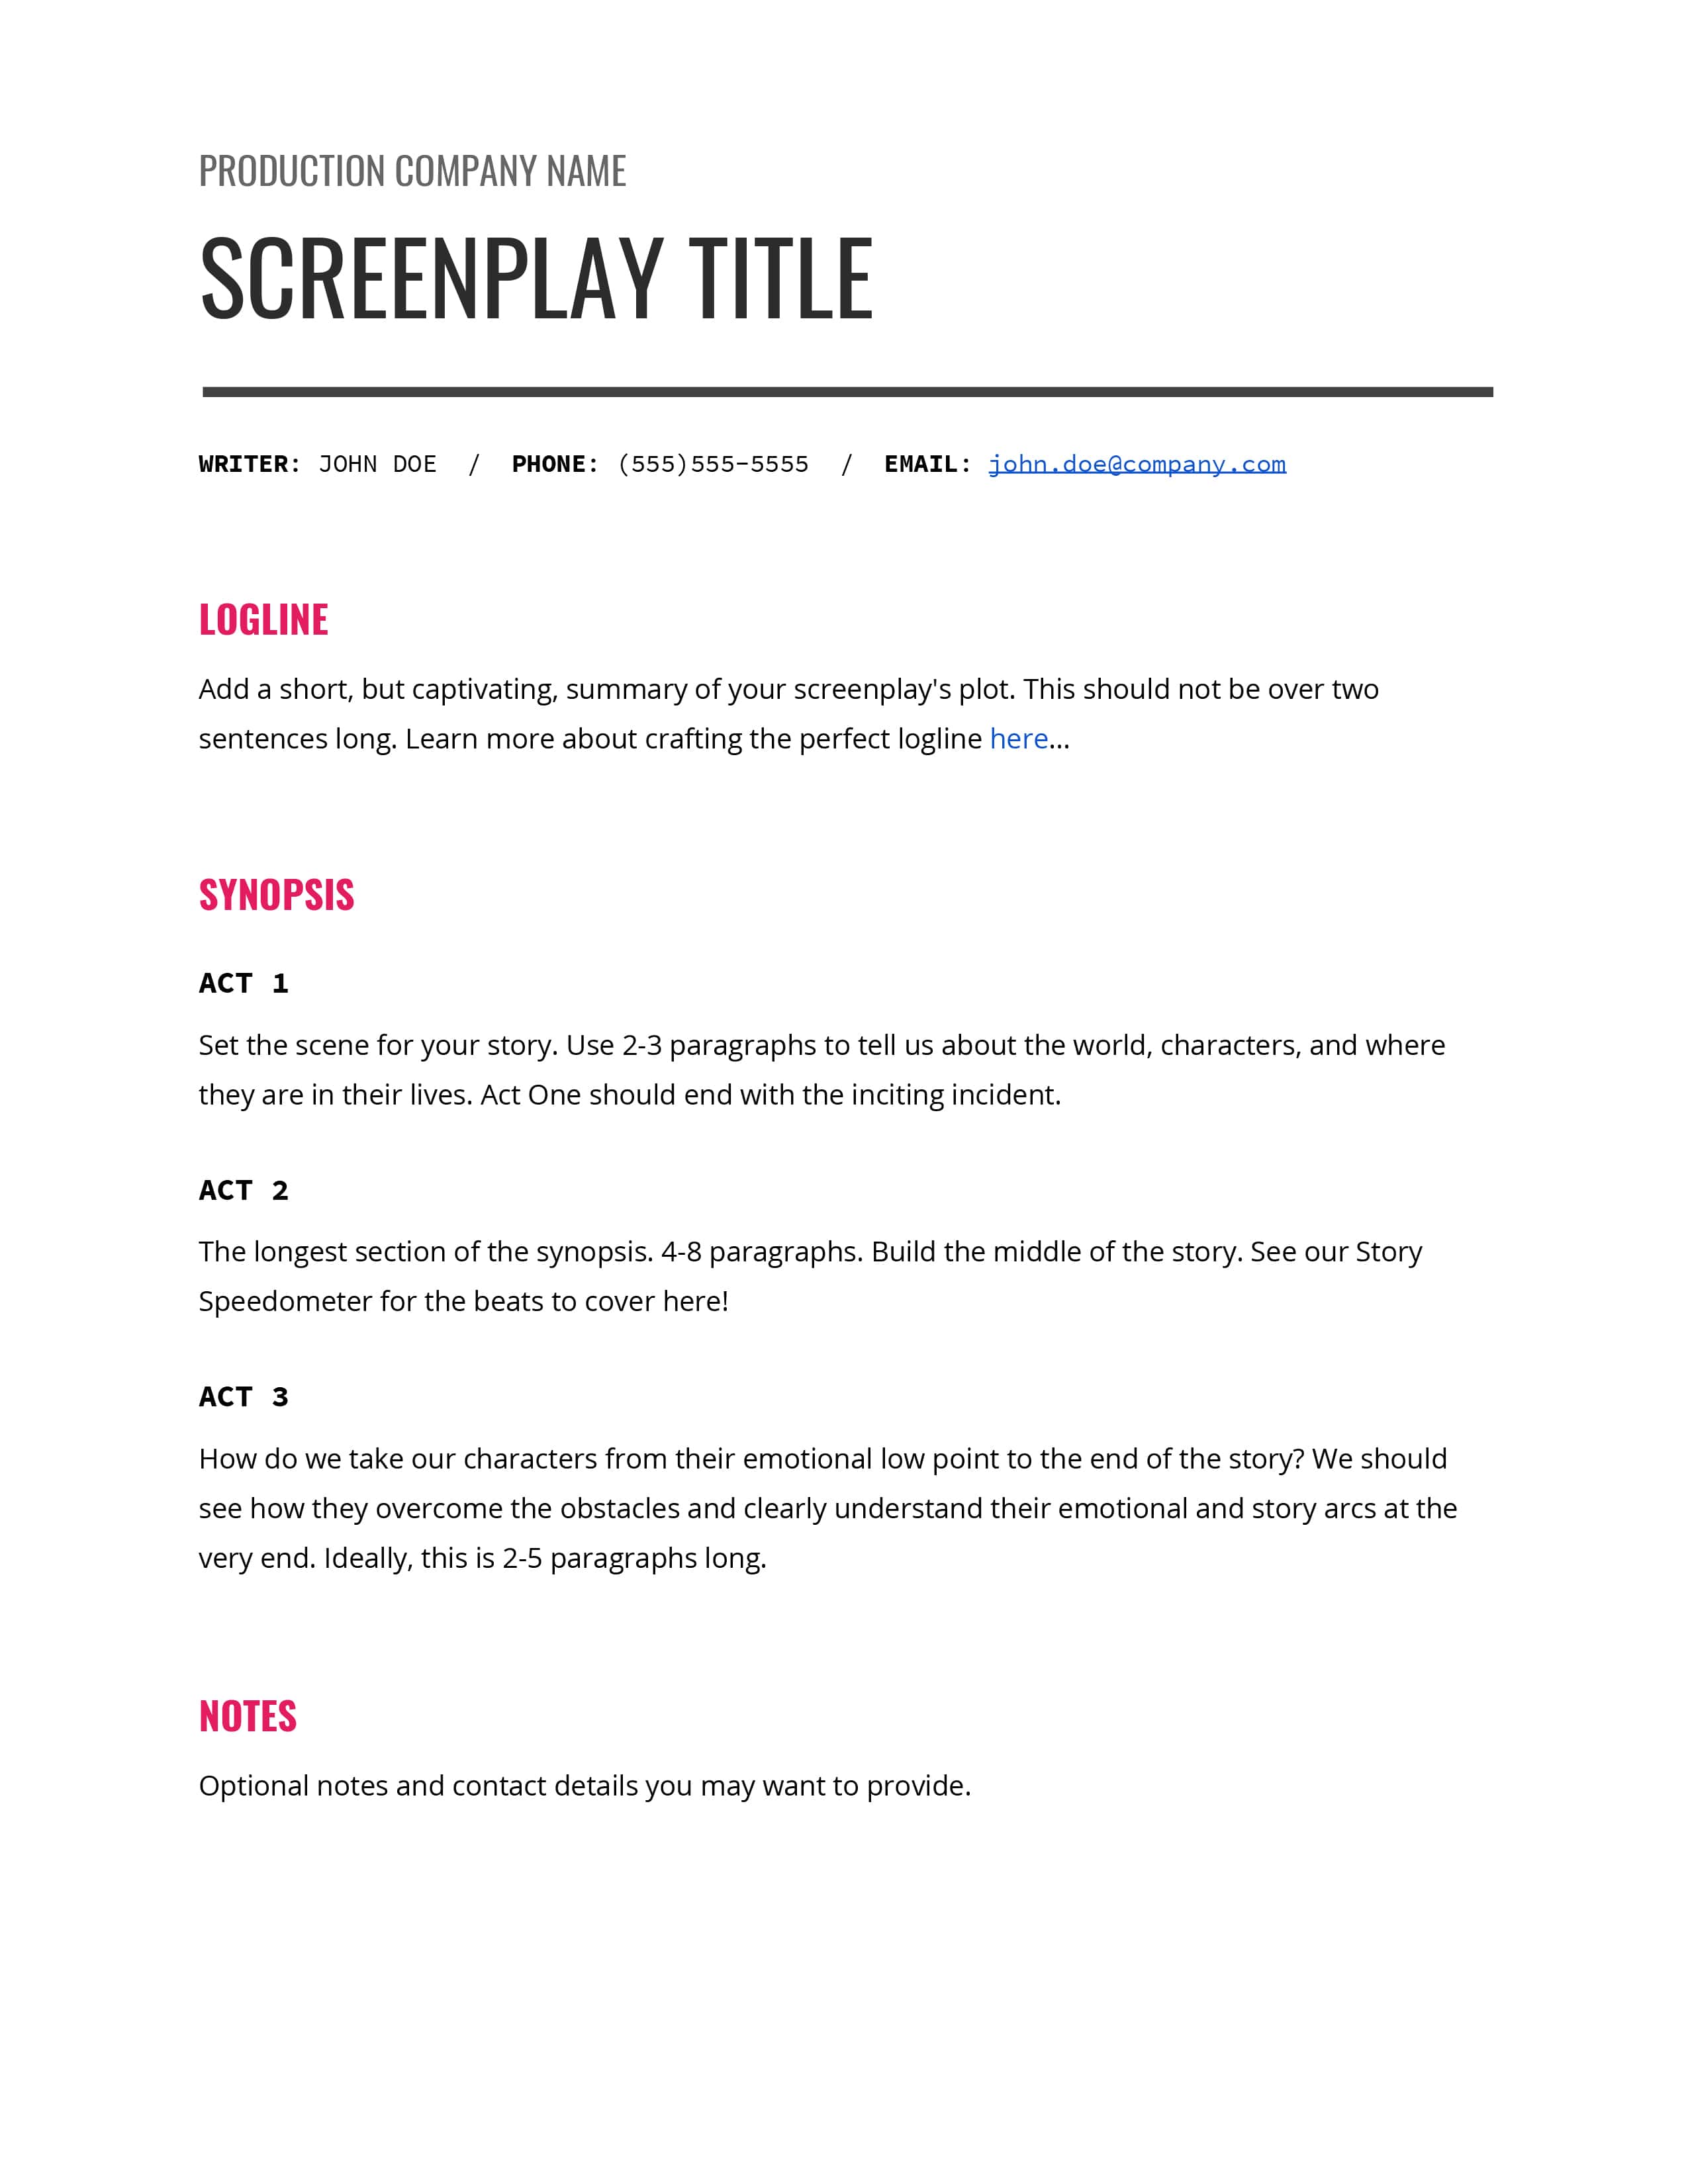 How to Write a Movie Synopsis that Sells [FREE Movie Synopsis